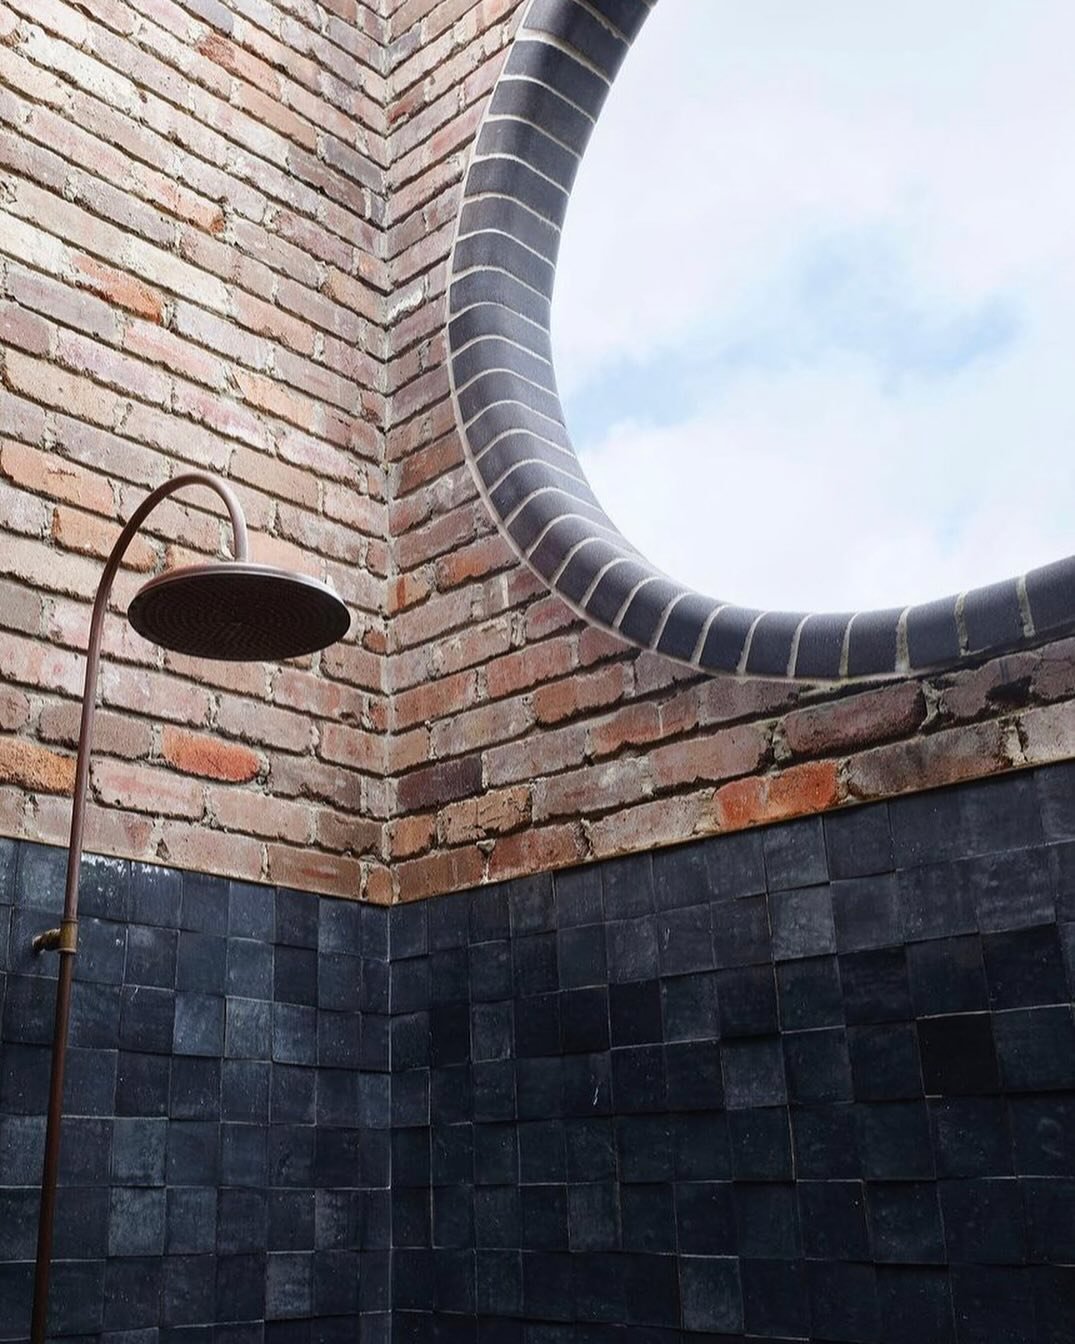 I was trawling through the endless images I have saved in the last few years and this wonderful precedent came up. I wish I could credit the rightful owner but it&rsquo;s a fantastic example of an exterior shower. Now we just need some sun!! Actually